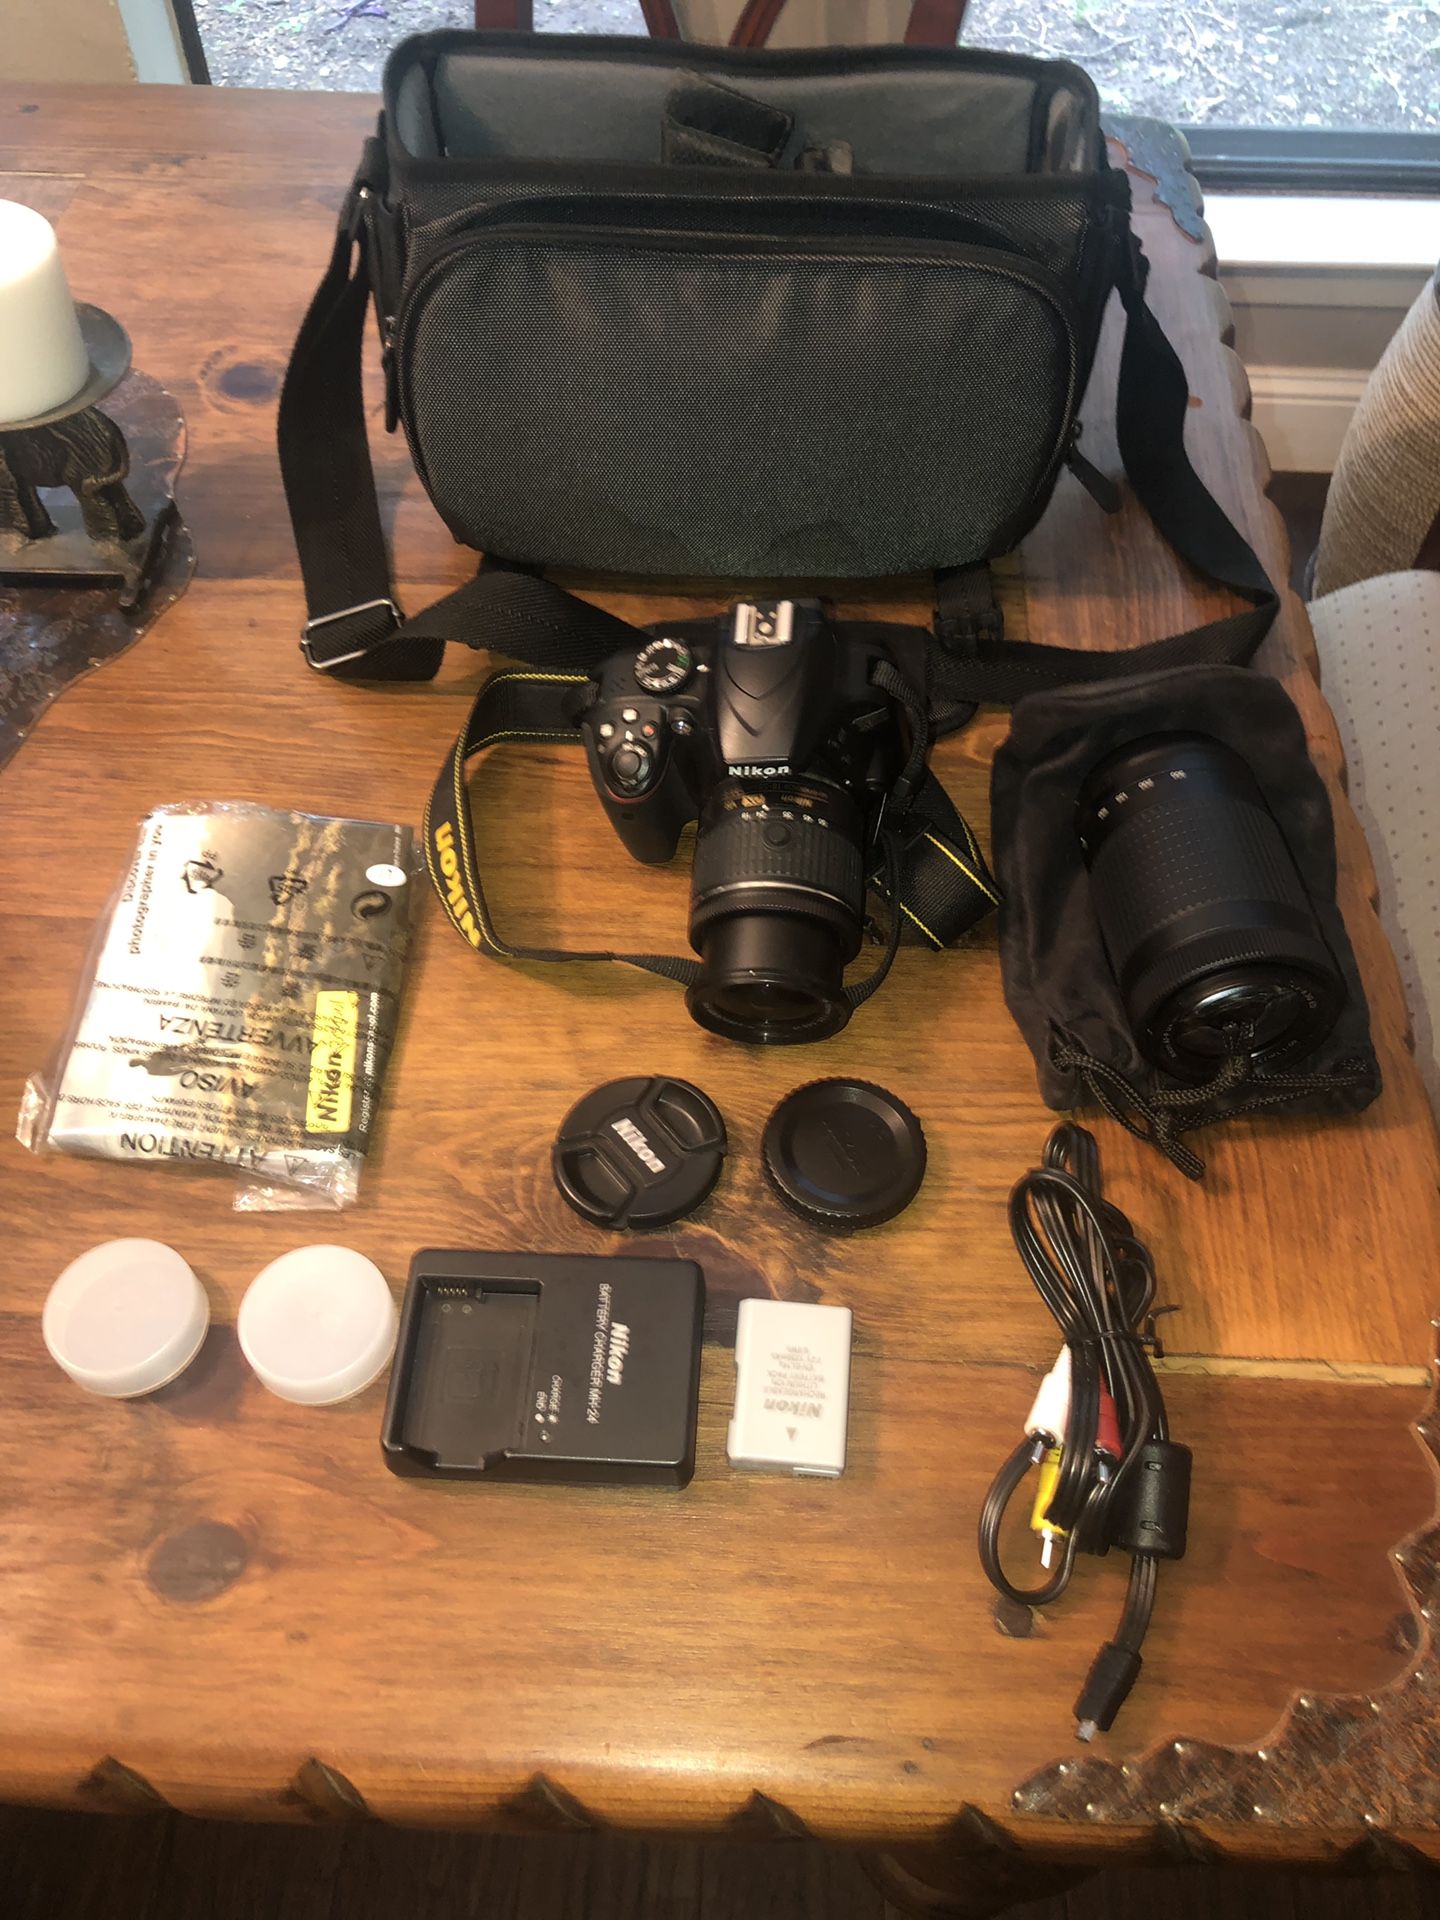 Nikon 5100 Camera with 2 lenses, battery, charger, cord, camera case.